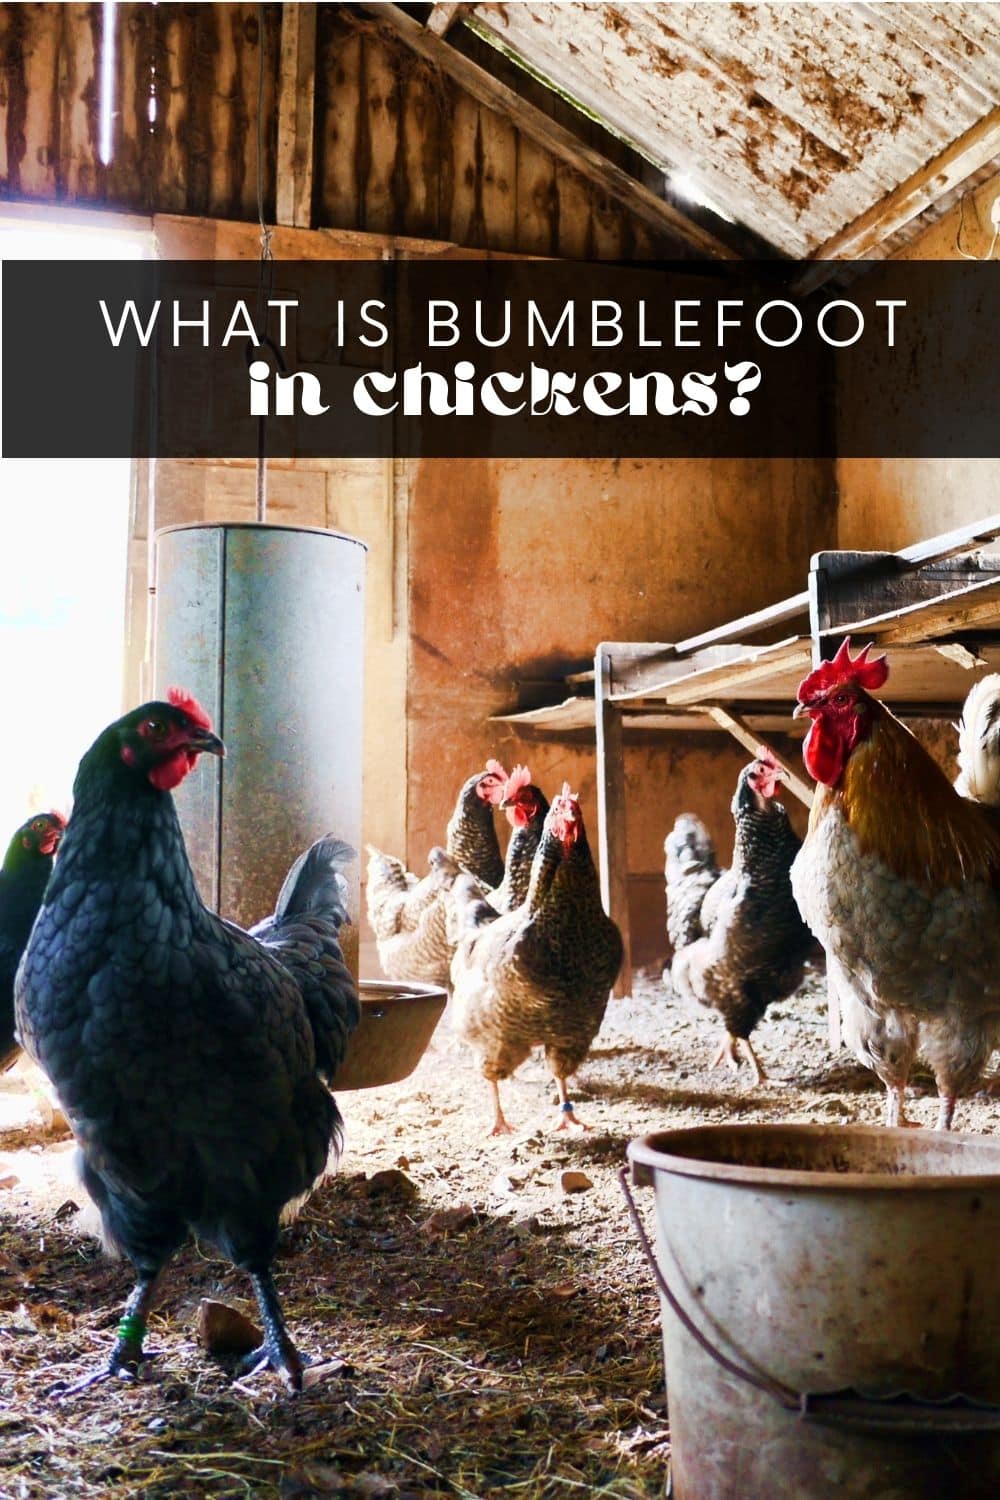 Bumblefoot is a common bacterial infection that can lead to serious health issues if left untreated. Learn how to prevent and treat bumblefoot, as well as other ways to keep your chickens happy and healthy in their coop! 